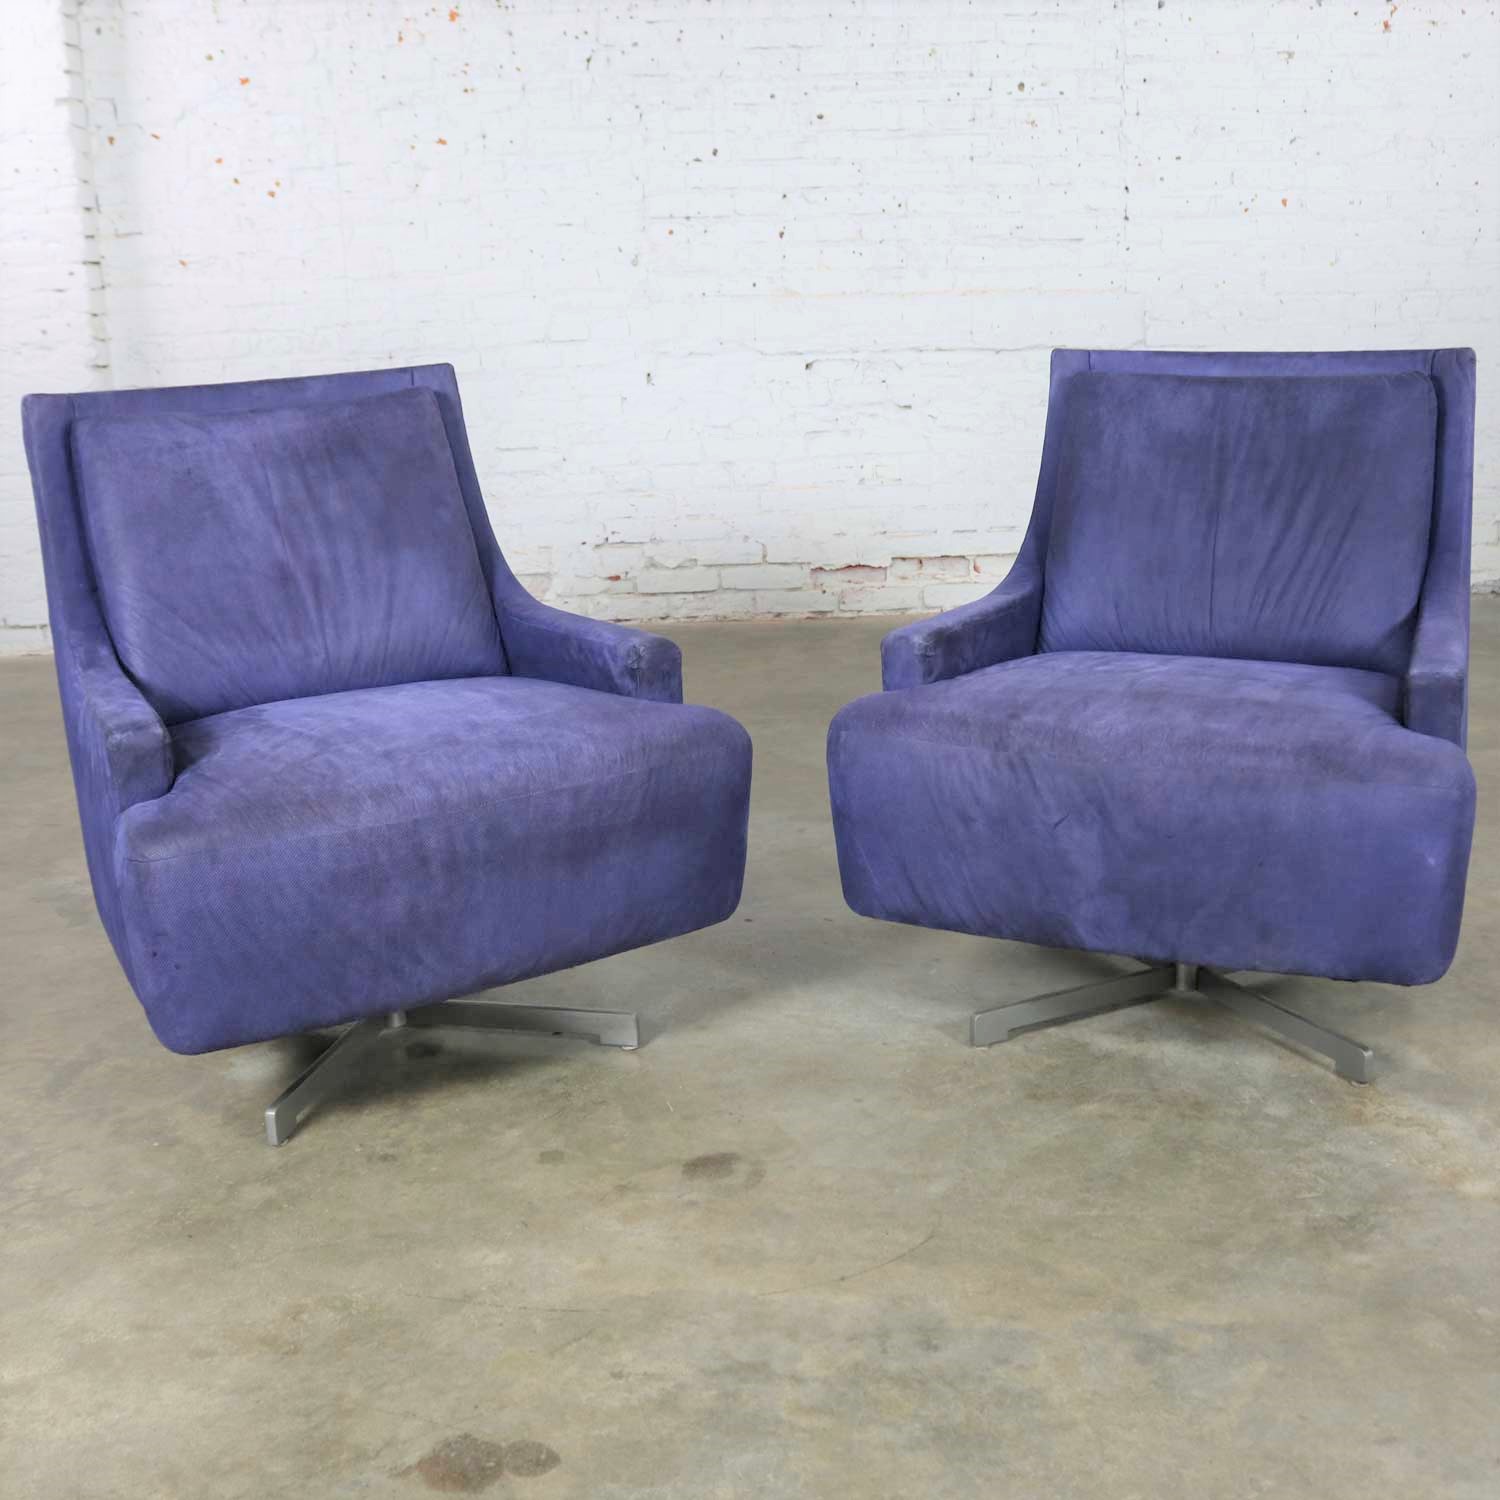 Pair of Aubergine Scoop Swivel Lounge Chairs with Metal Base by Barbara Barry for HBF